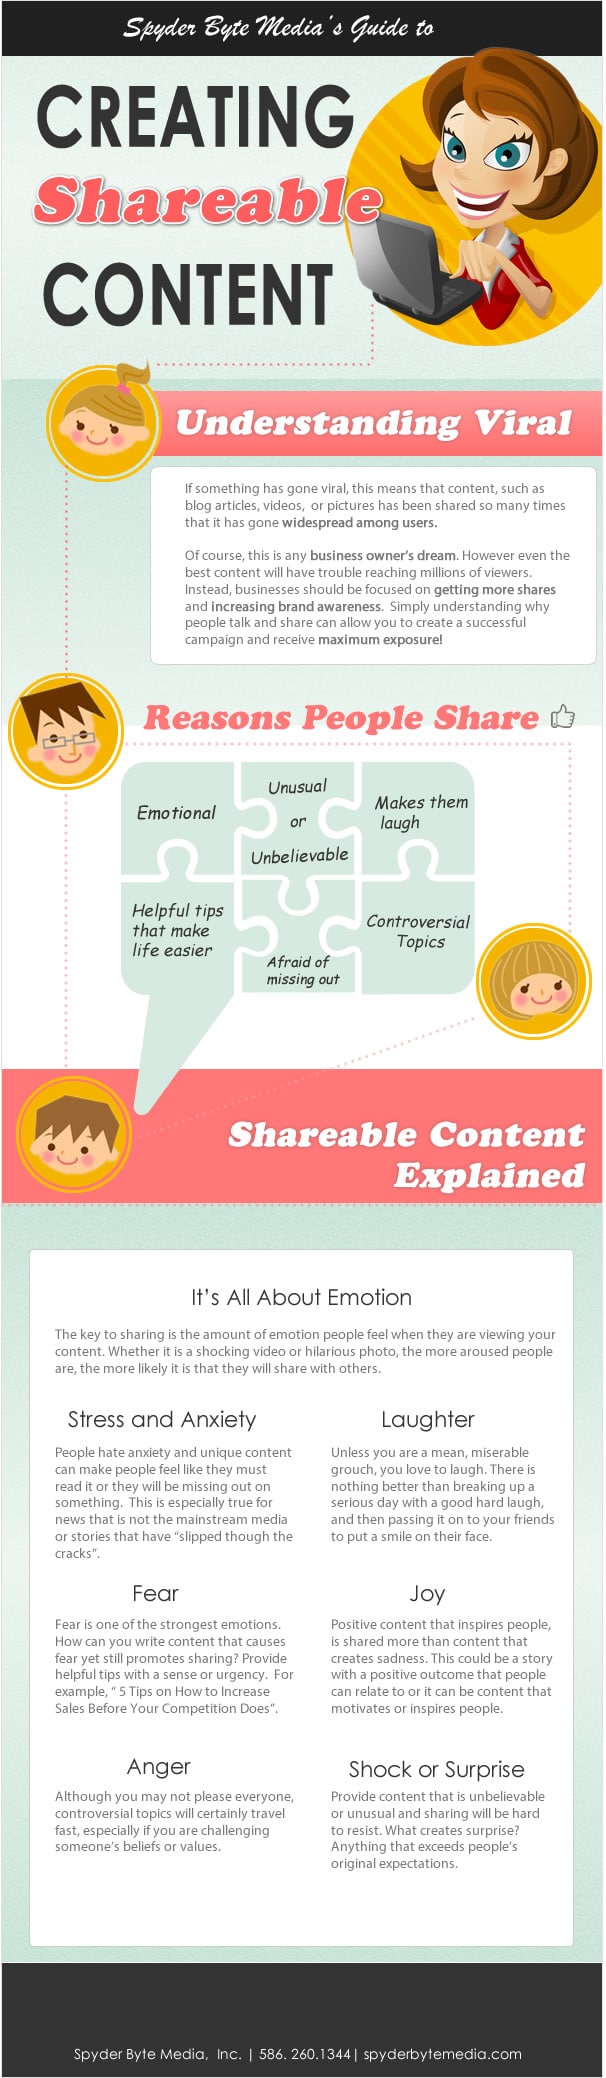 Creating Shareable Content for Maximum Exposure